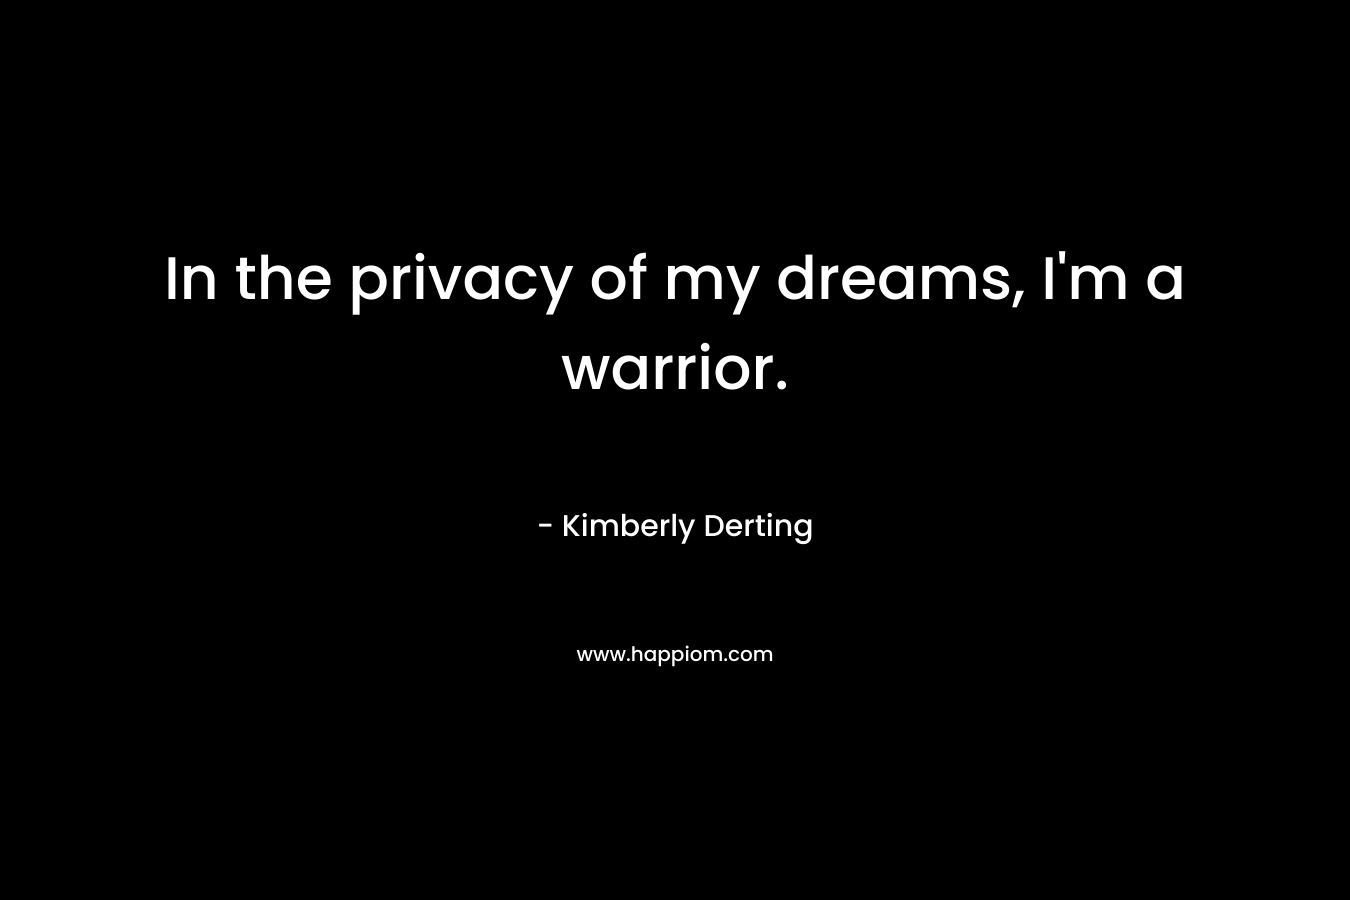  In the privacy of my dreams, I'm a warrior.